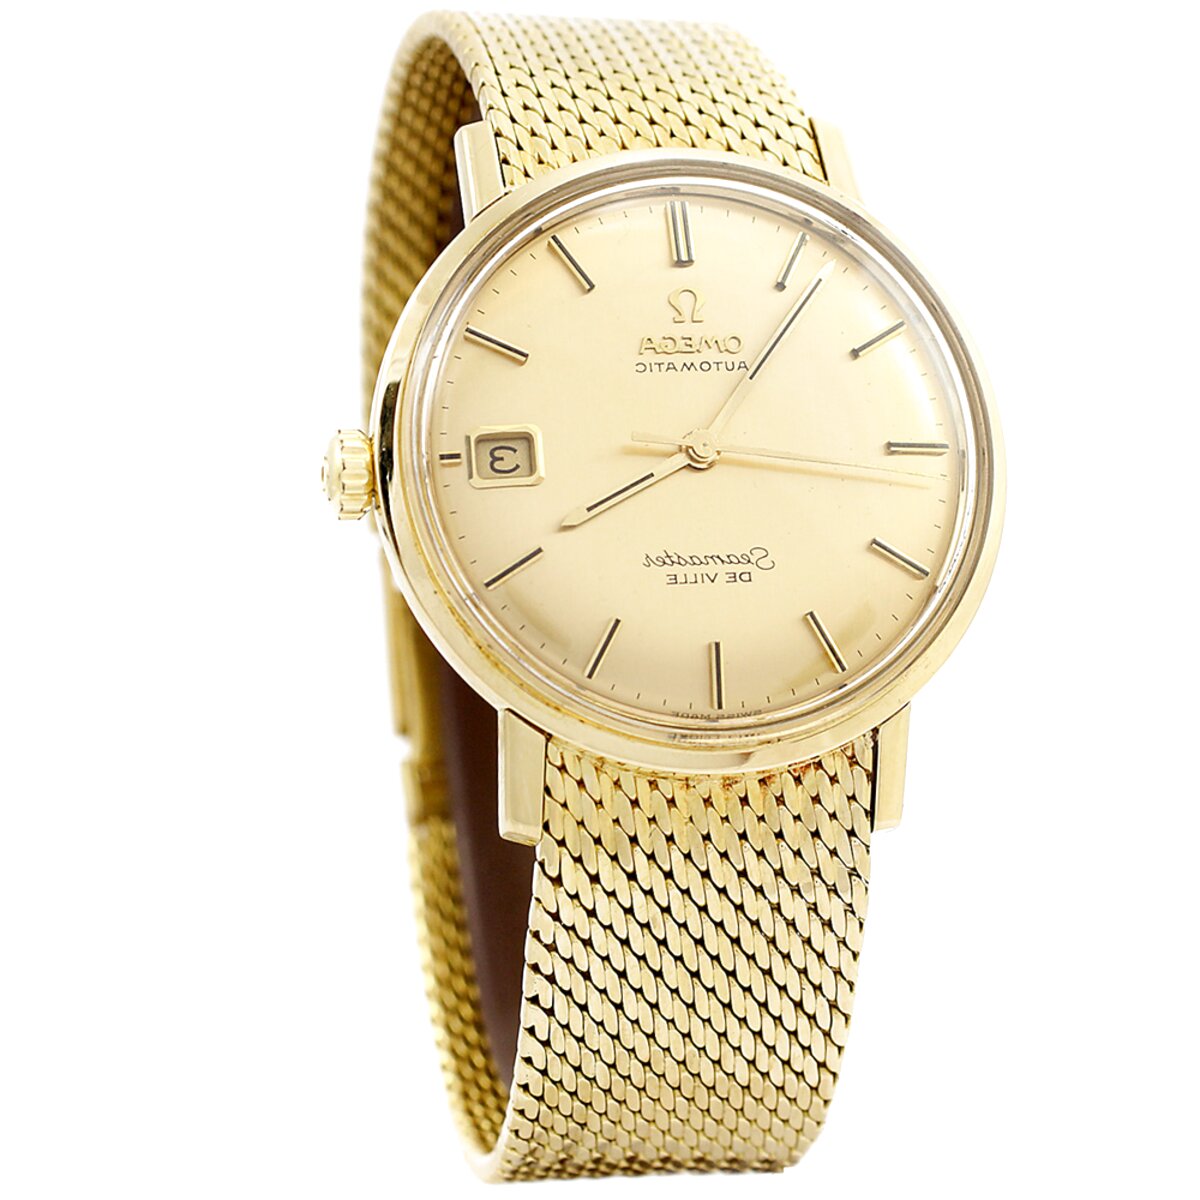 Omega Seamaster 18Ct Gold Watches for sale in UK | 30 used Omega ...